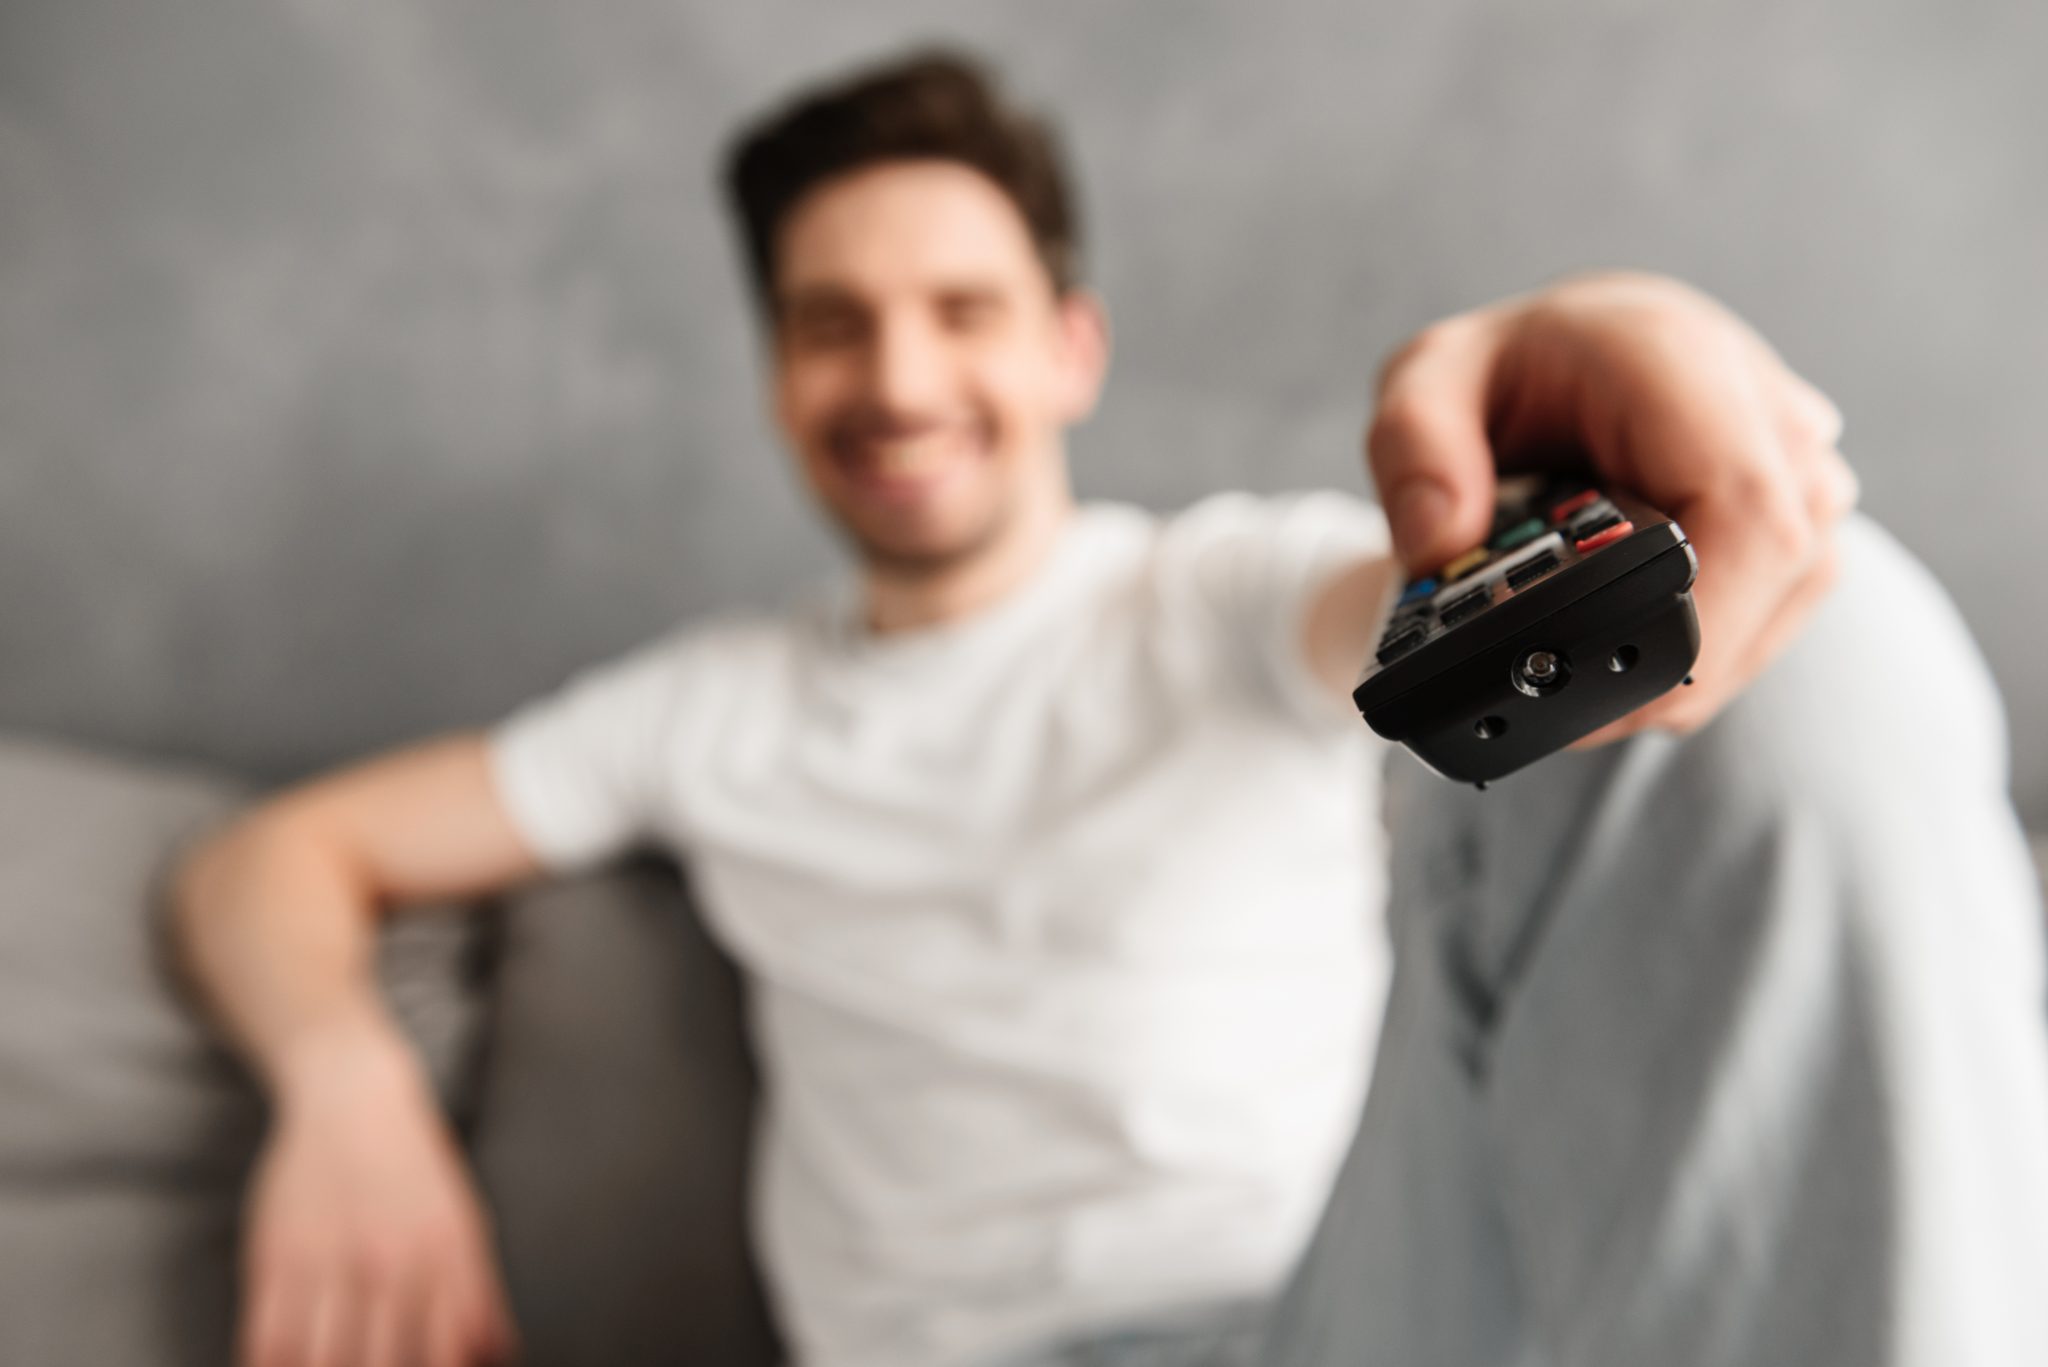 Blurry photo with focus on remote control, young man 30s in casu